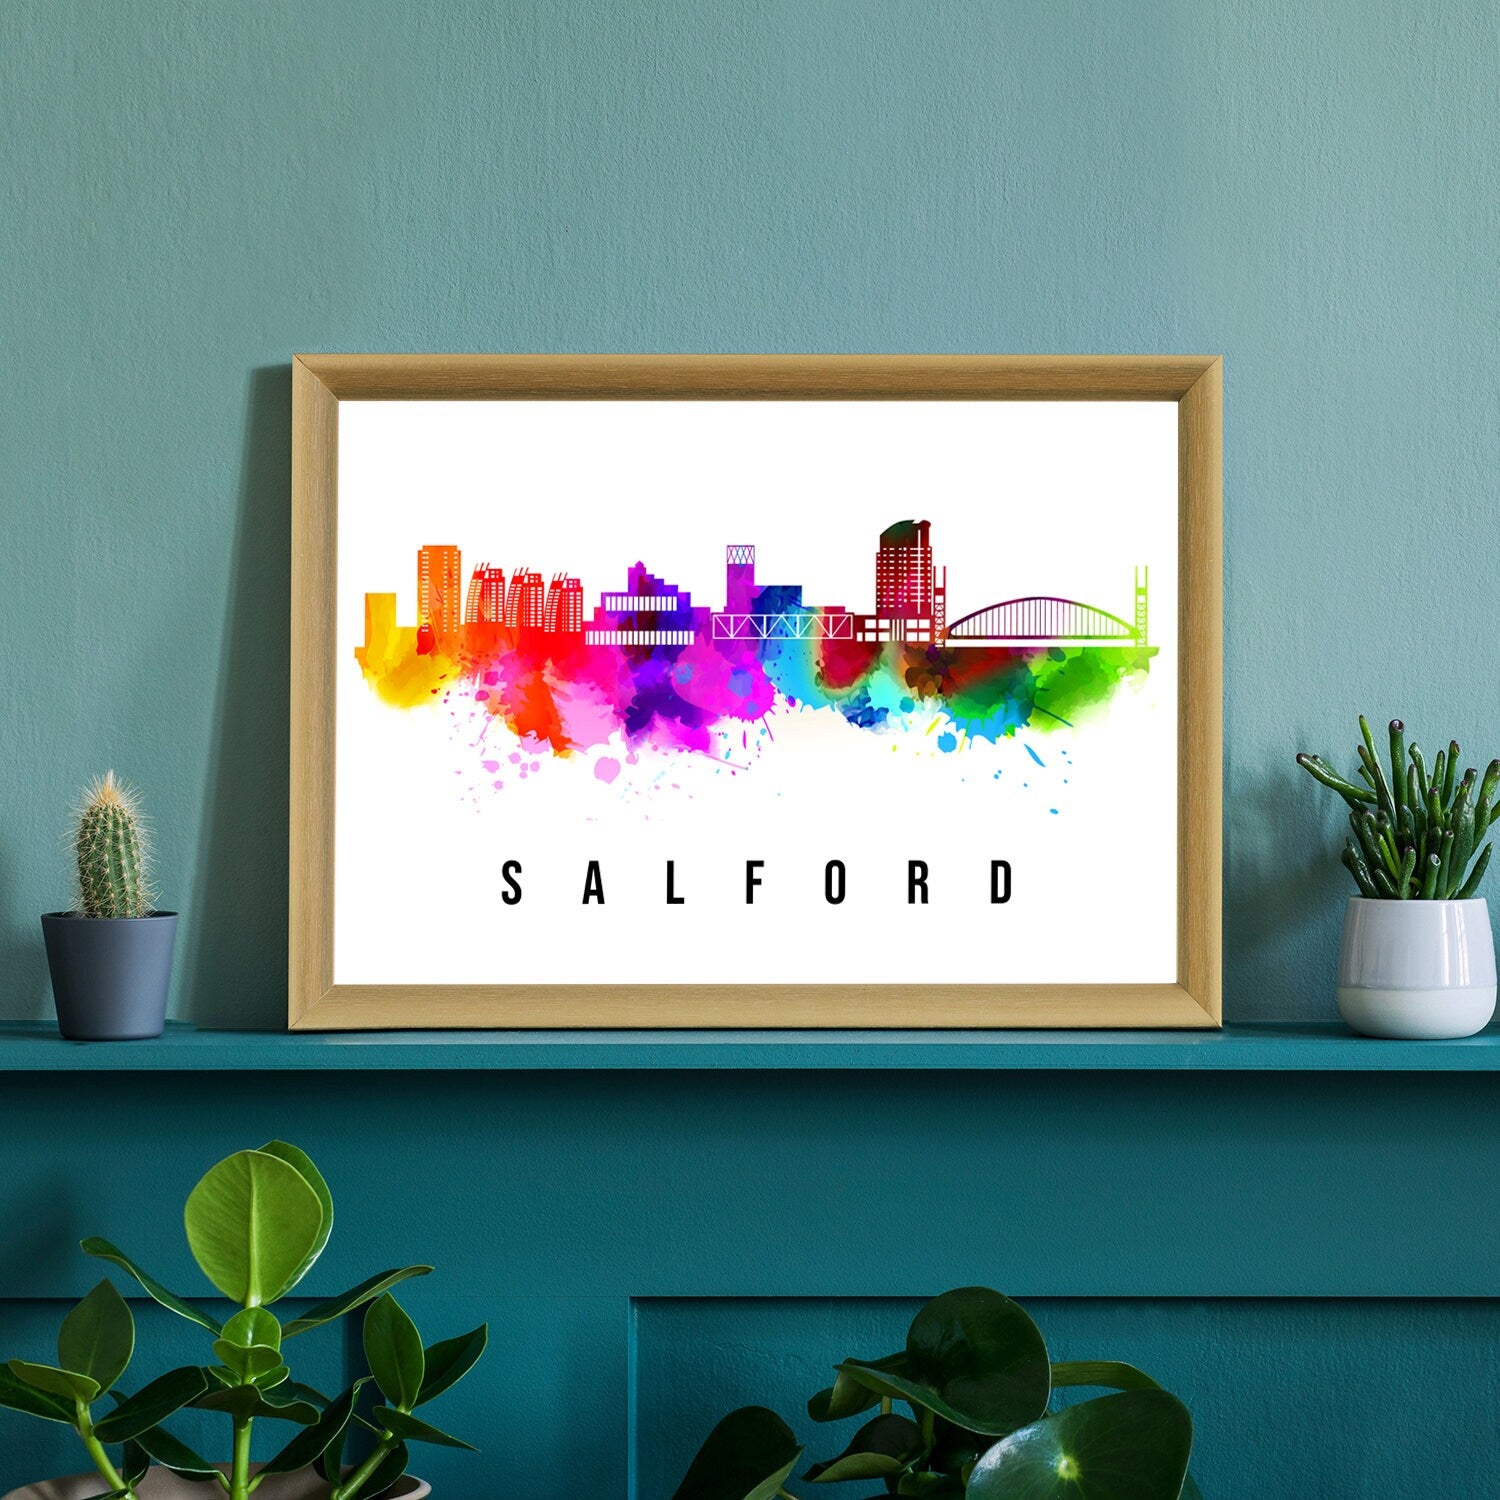 Salford England Poster, Skyline poster cityscape poster, Landmark City Illustration poster, Home wall decoration, Office wall art